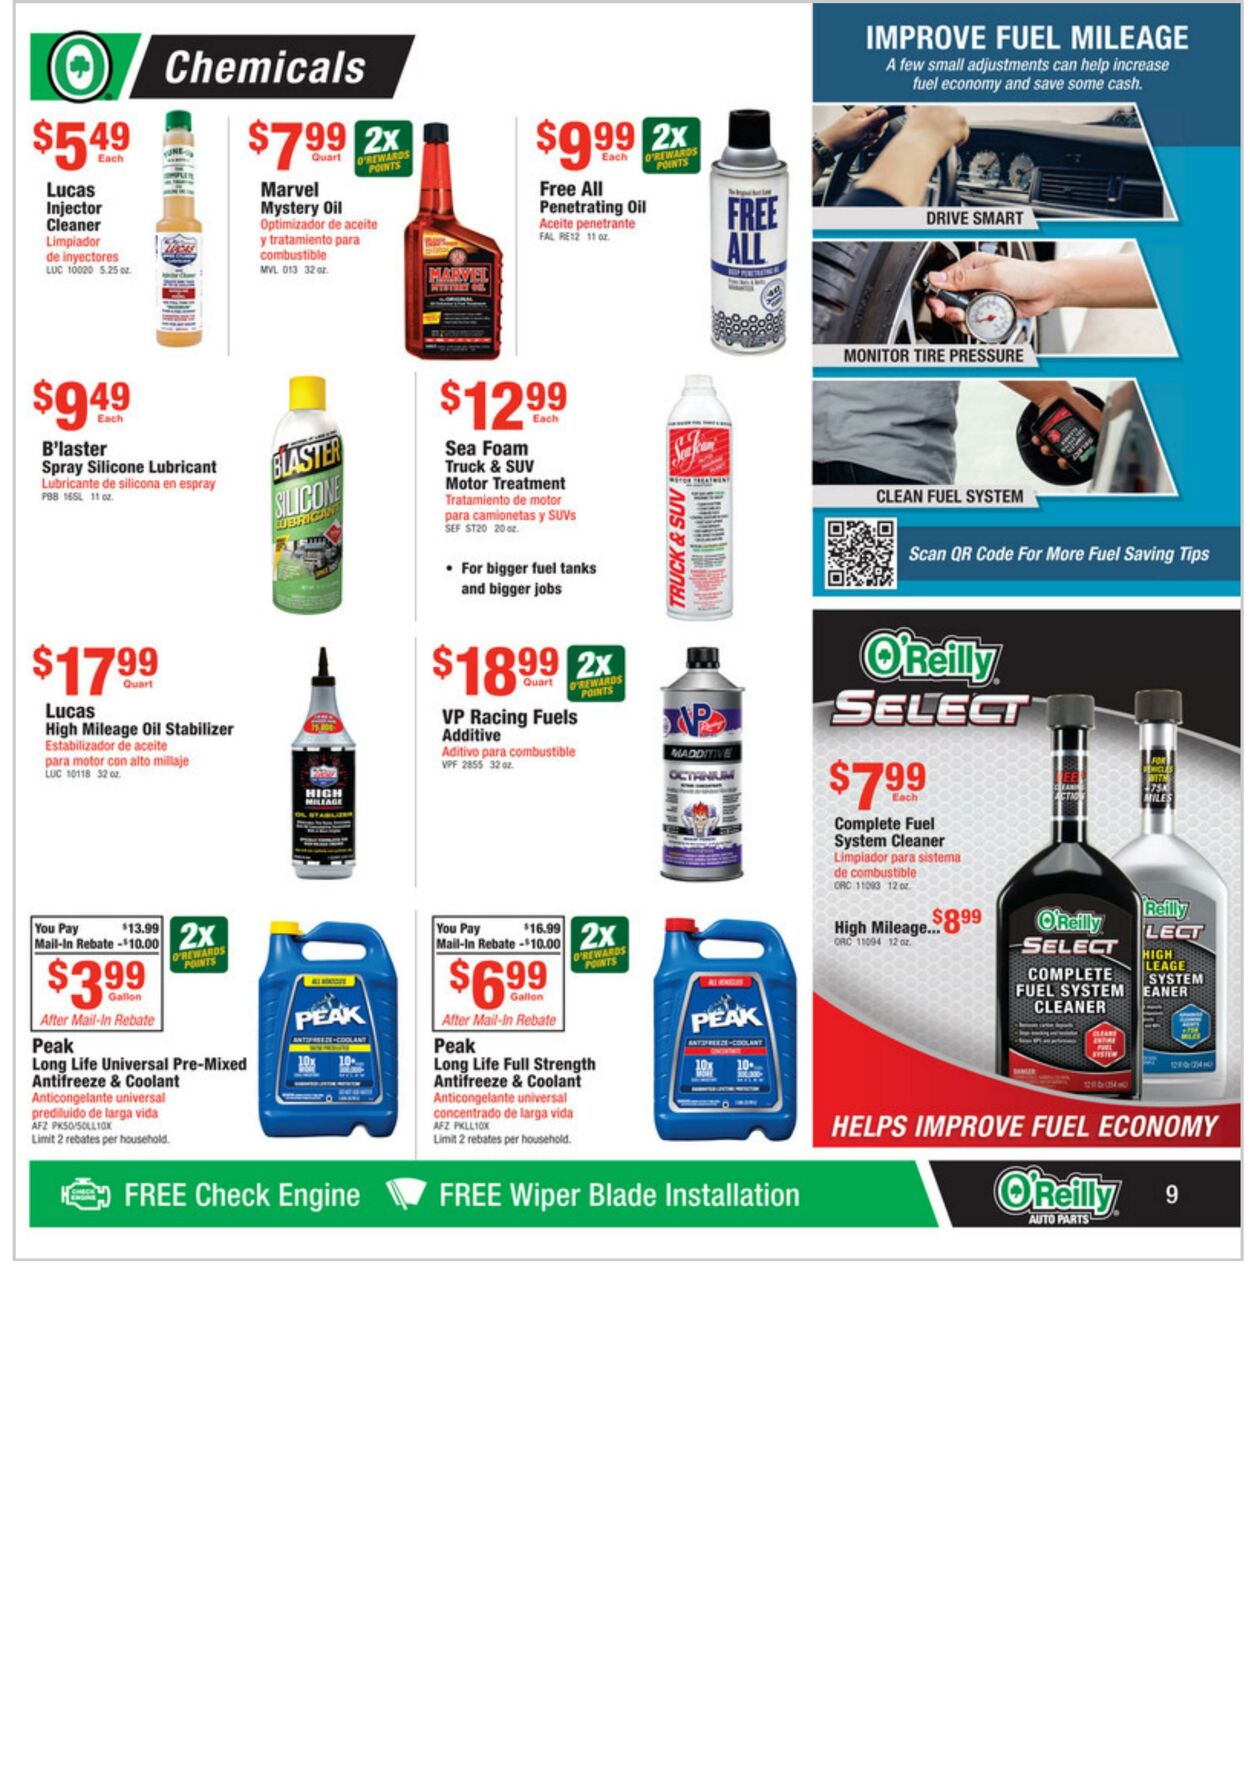 Weekly ad O’Reilly Auto Parts 09/28/2022 - 10/25/2022